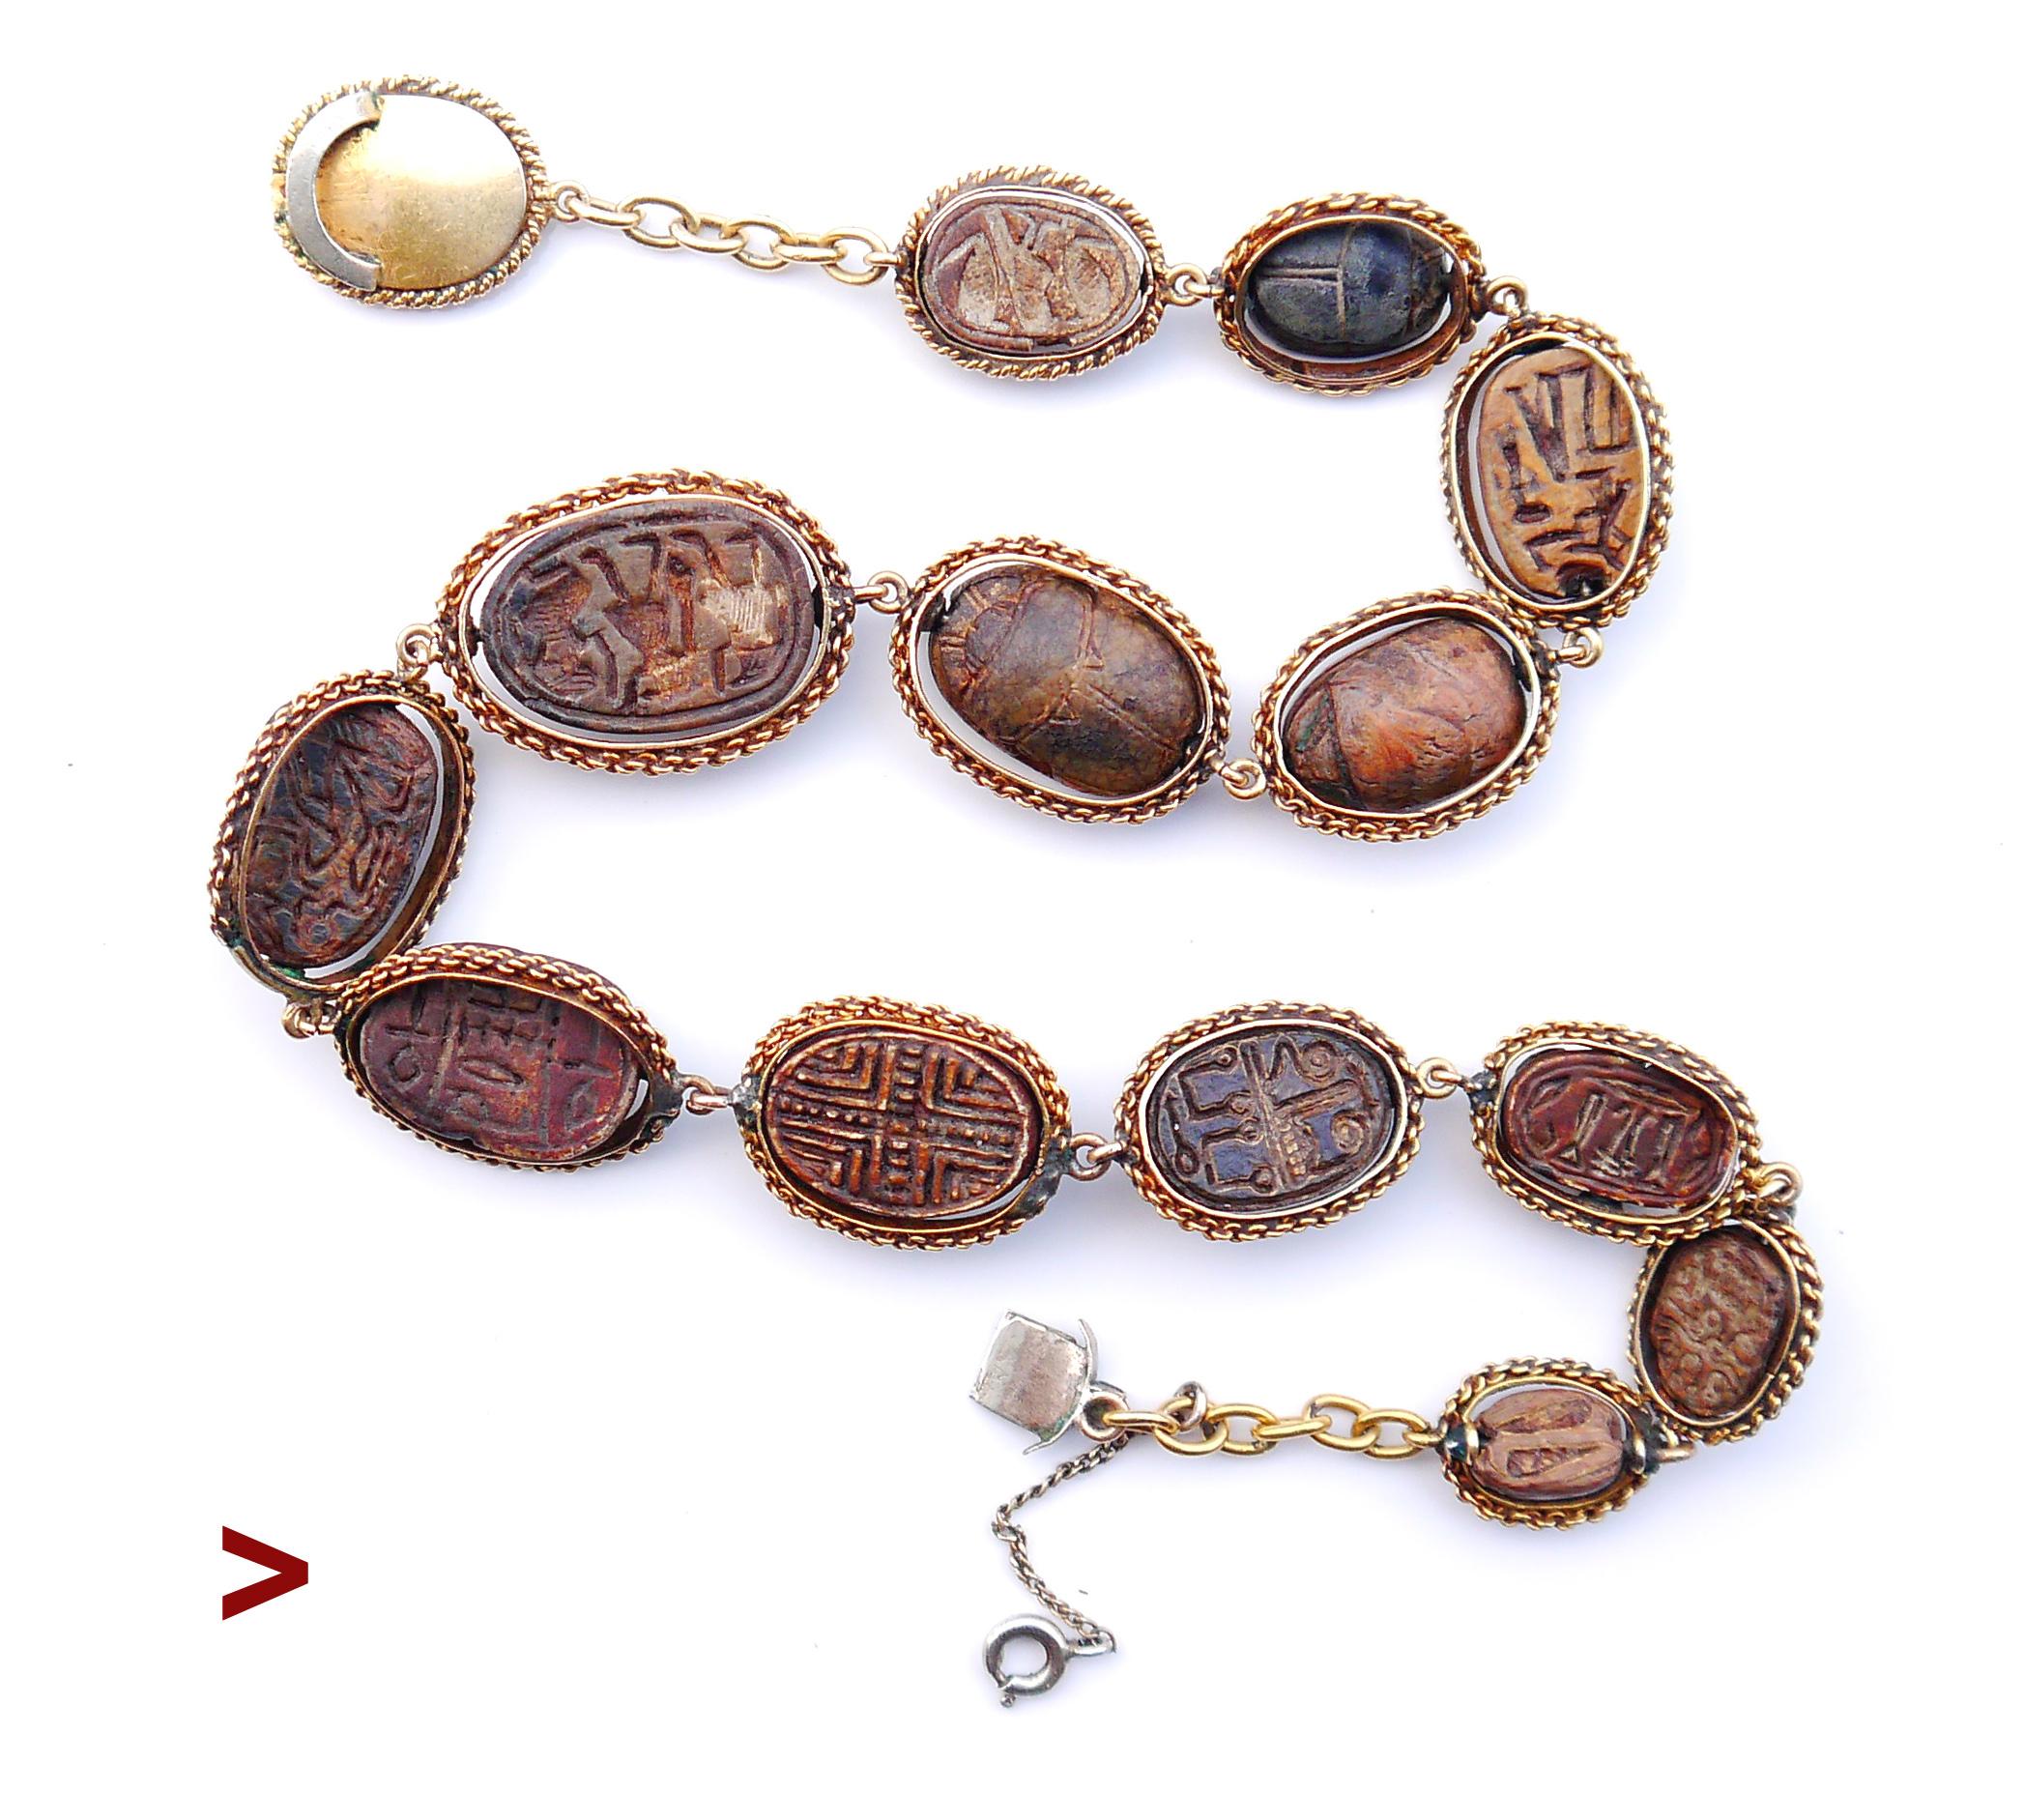 This a unique opportunity to buy an extremely rare and strikingly unusual antique necklace, a fine example of Egyptian Revival jewelry composed of 14 genuine ca.1786 -1567 BC ancient Hyksos Egyptian / Middle Eastern Soapstone or Steatite Scarabs